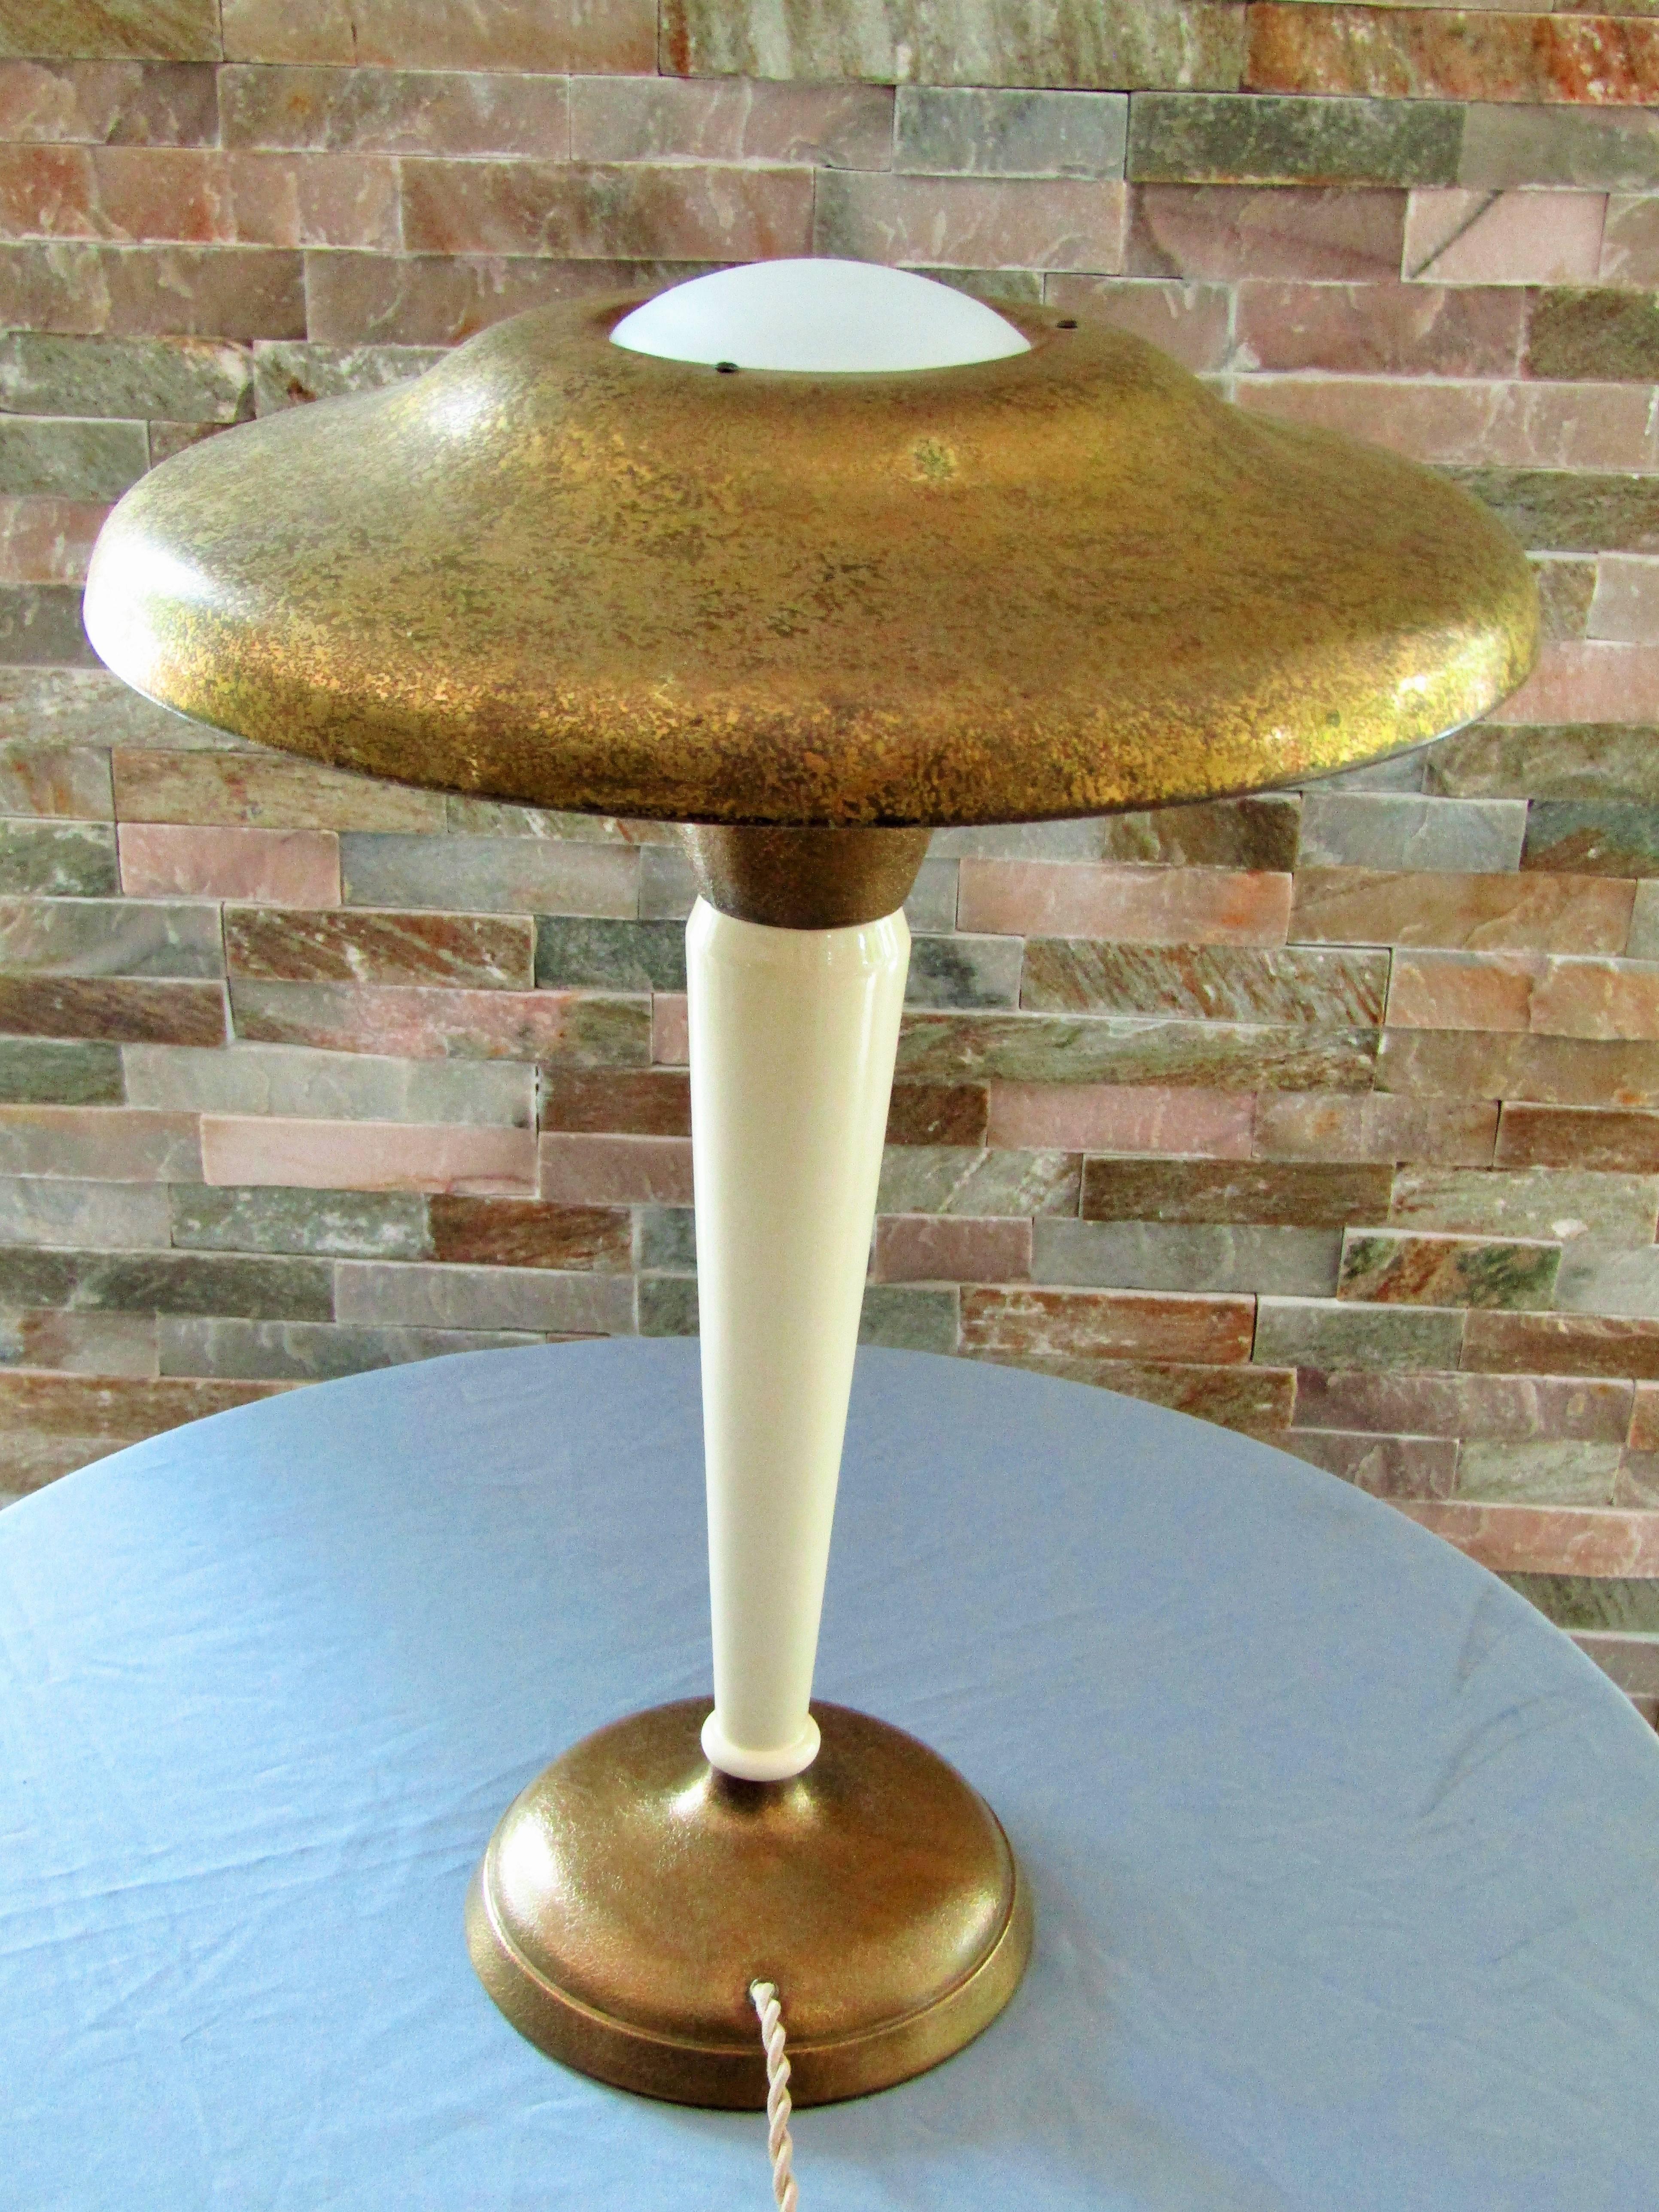 Art Deco table / desk lamp by Genet & Michon manufacturer, France, 1930. Typical three dimensional brass structure. Middle part lacquered in ivory color. Spherical frosted glass top. Fully restored, rewired.

 